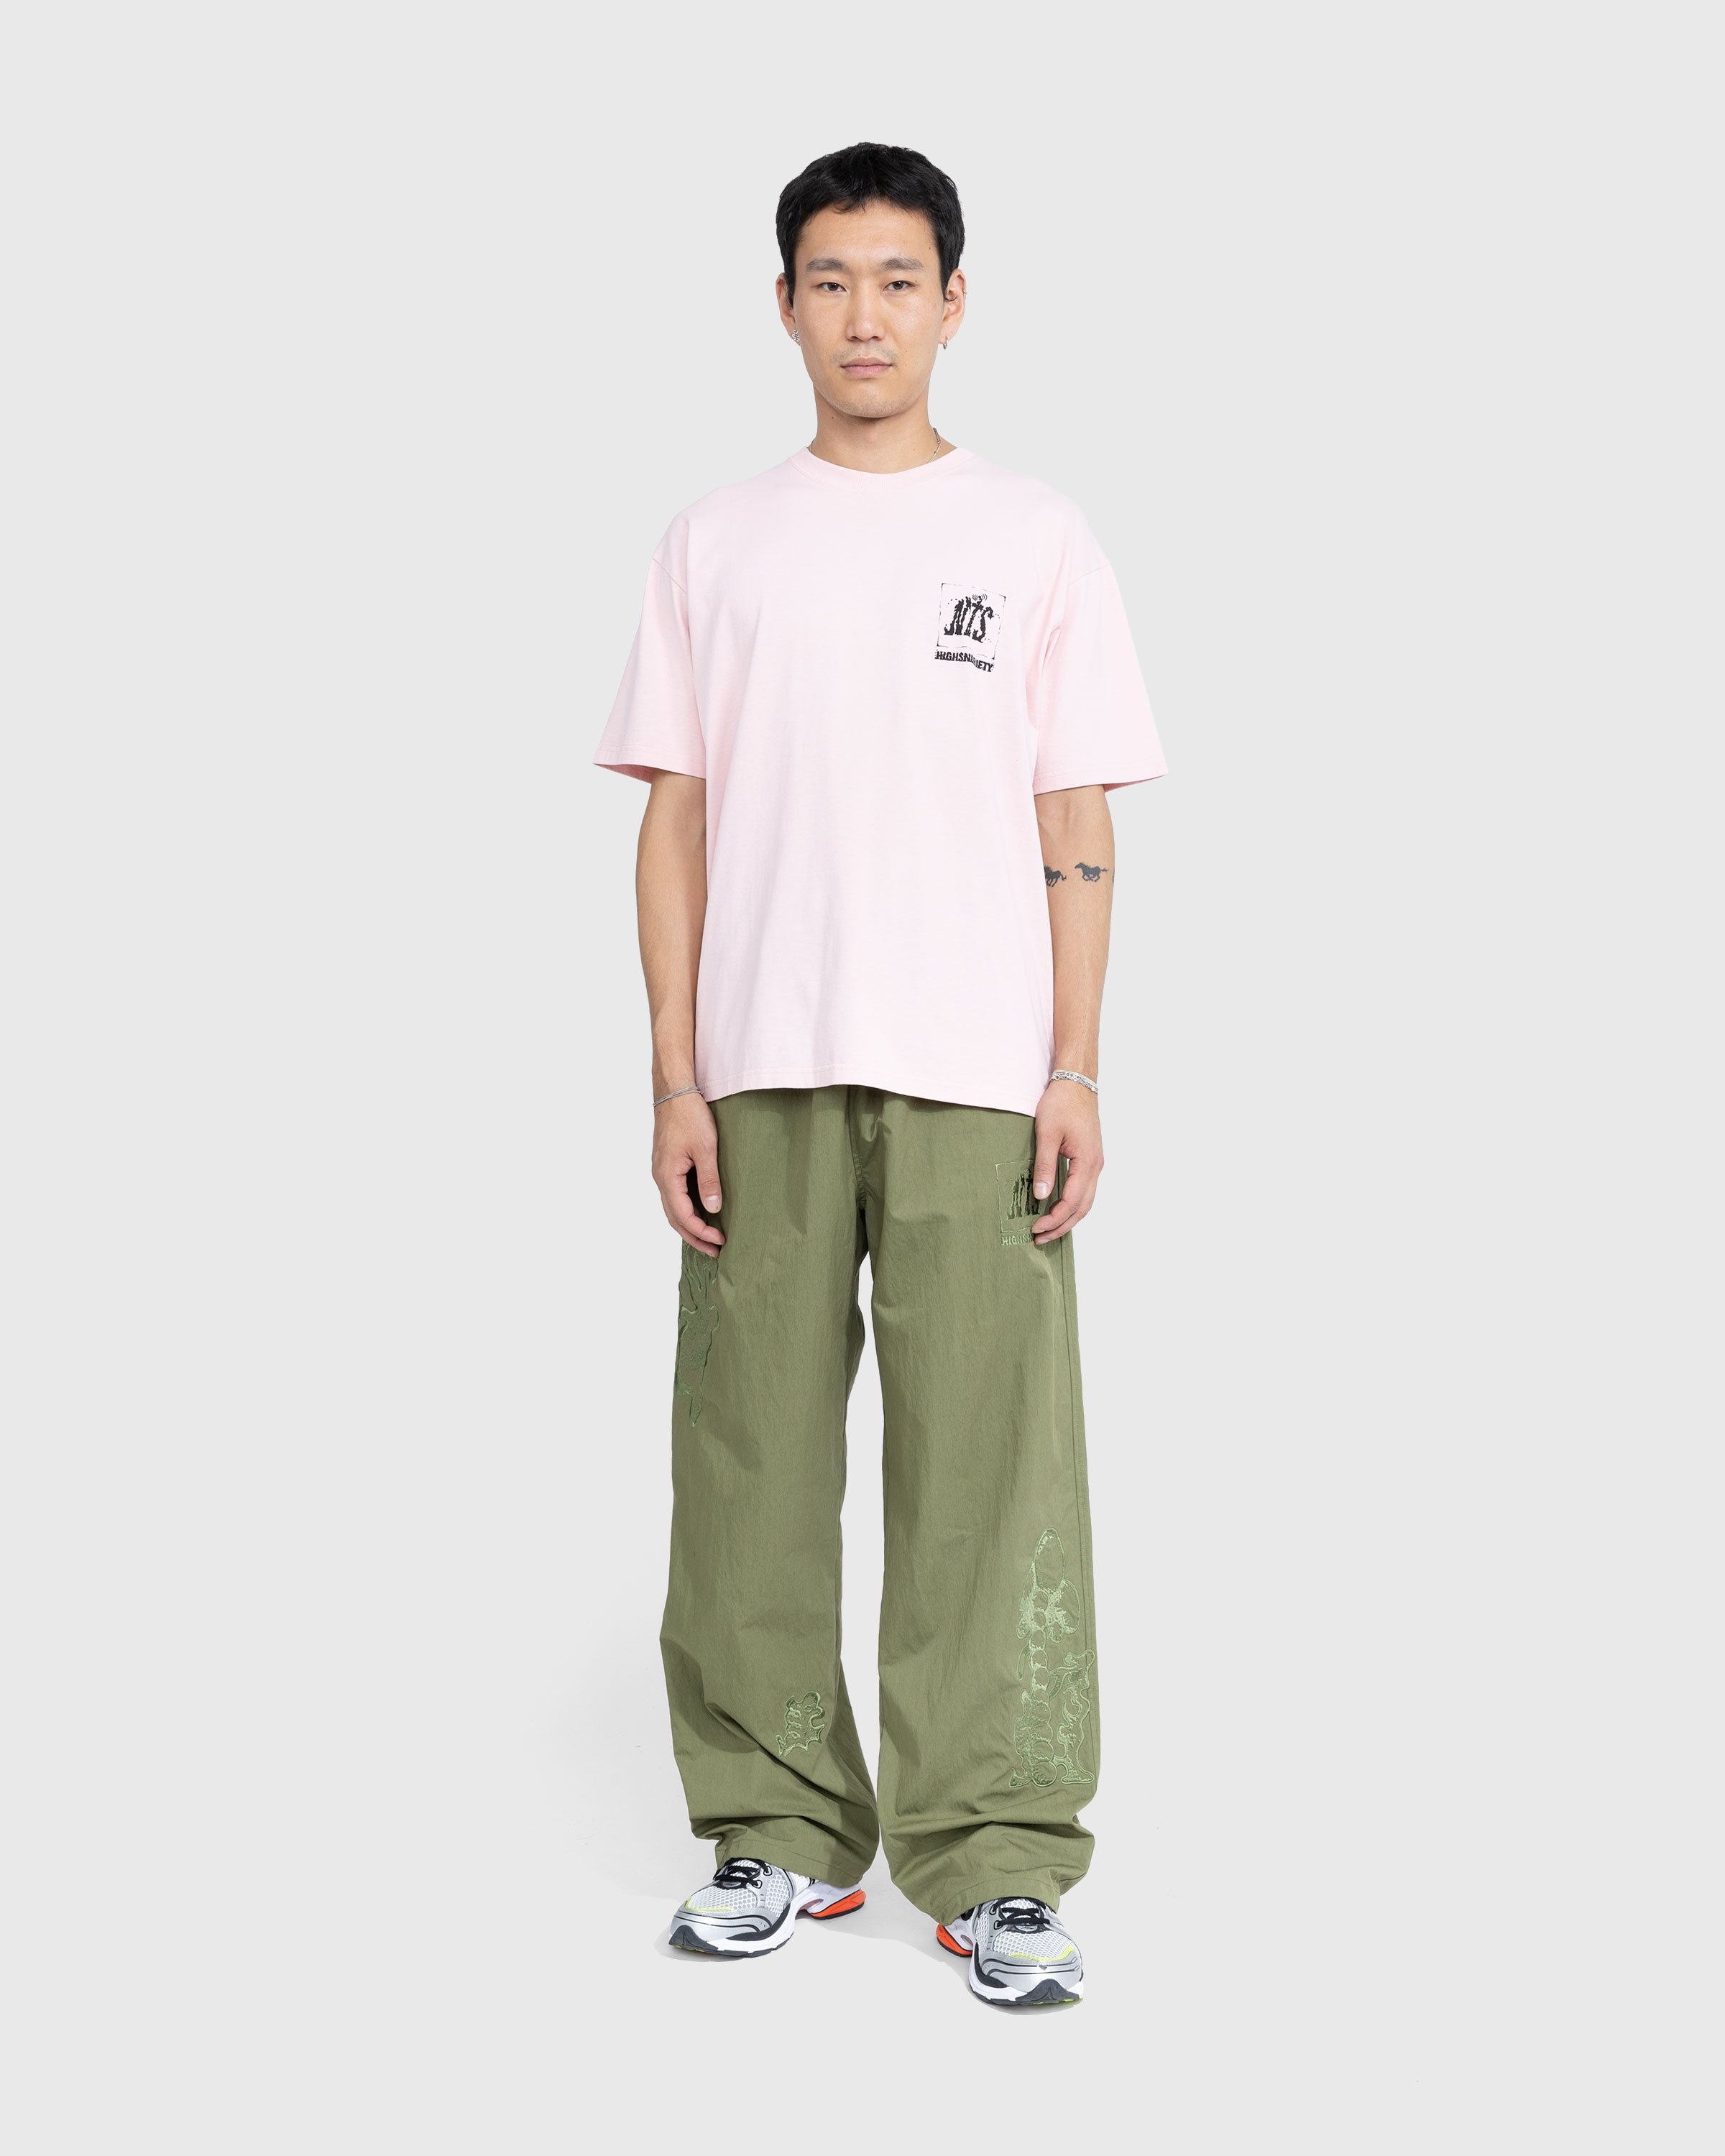 NTS x Highsnobiety – Graphic T-Shirt Pink  - Tops - Pink - Image 5